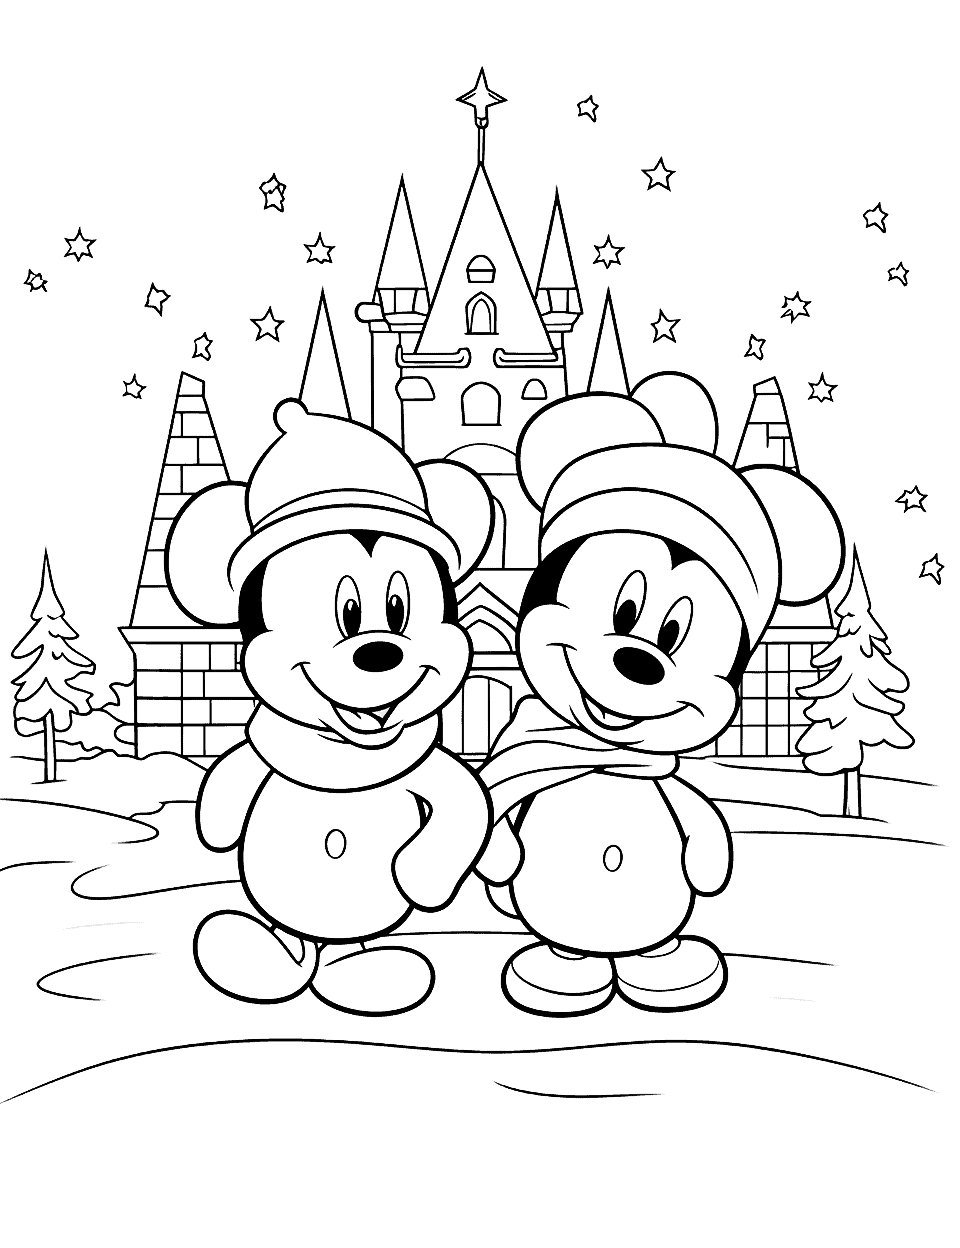 Mickey's Ice Palace Winter Coloring Page - Mickey and Minnie in front of an ice palace, creating a festive ambiance.